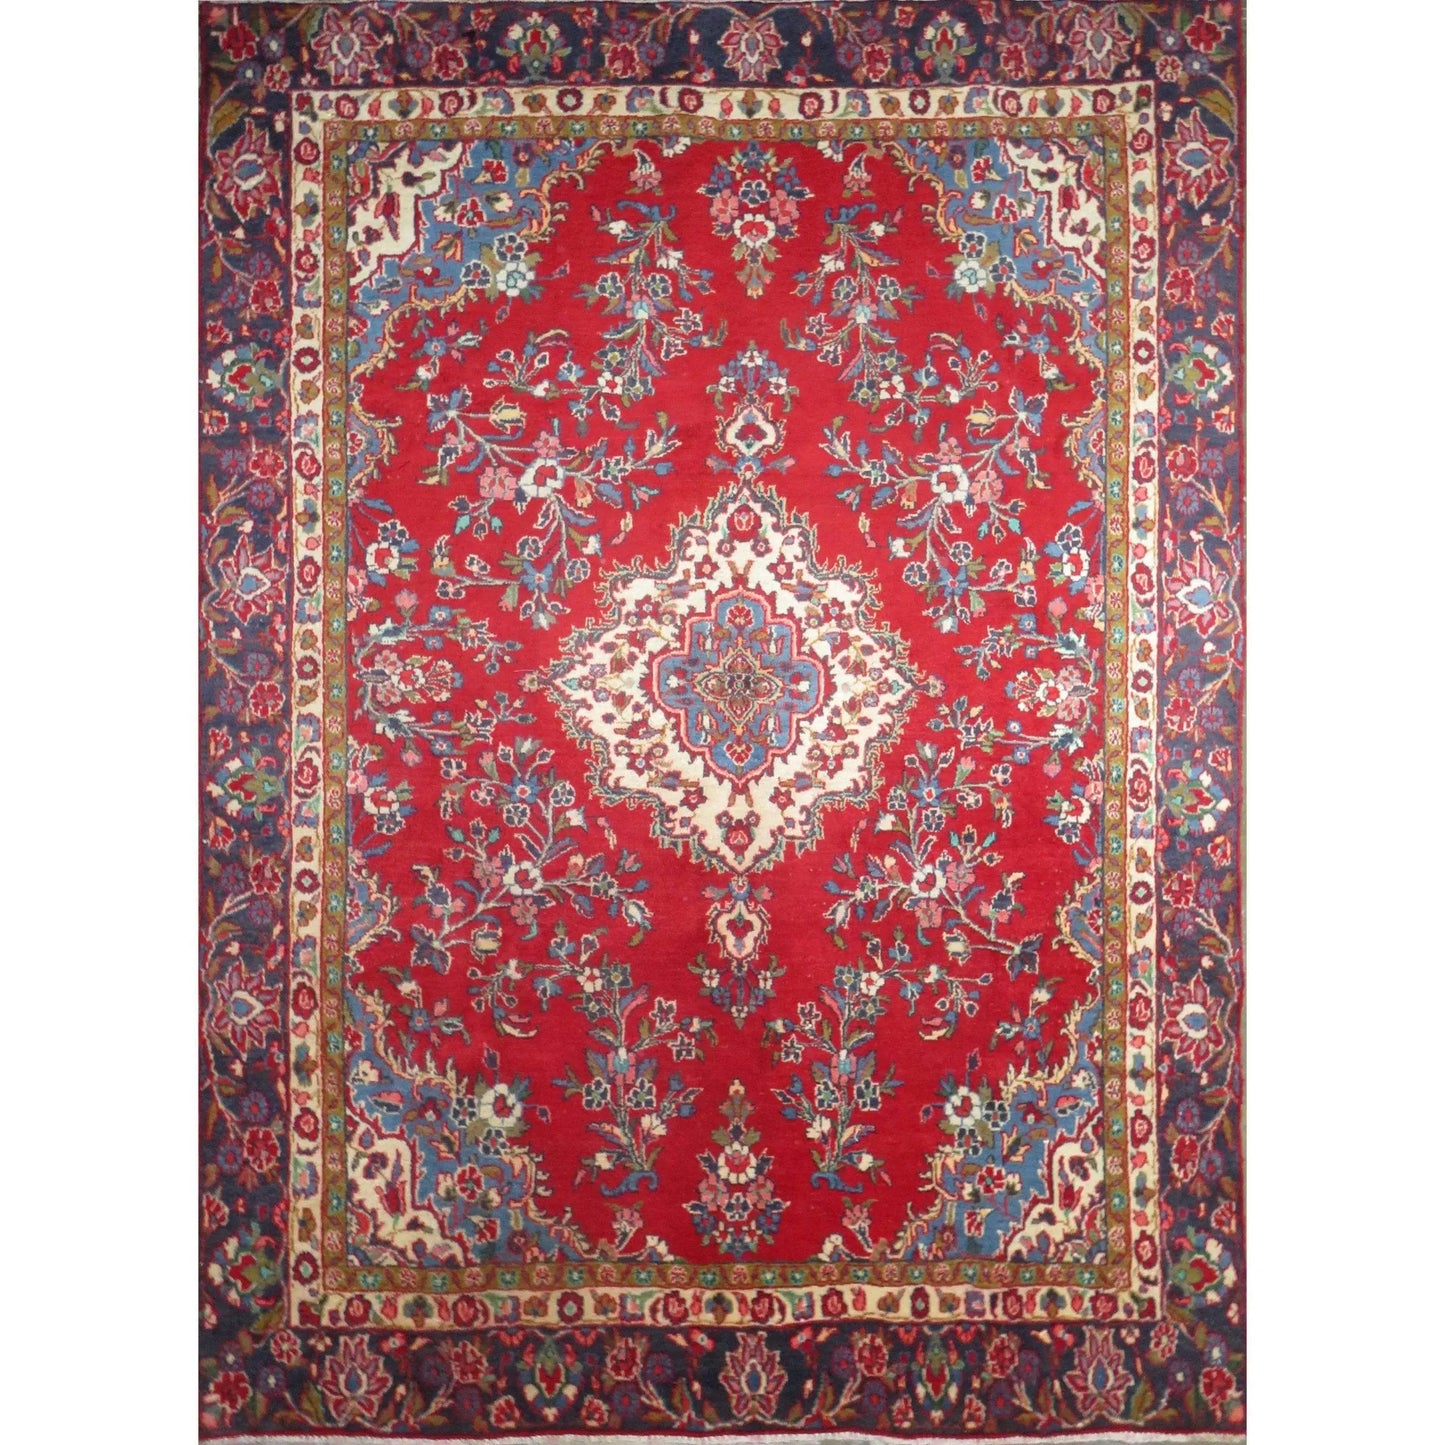 Hand-Knotted Persian Wool Rug _ Luxurious Vintage Design, 10'1" x 7'1", Artisan Crafted